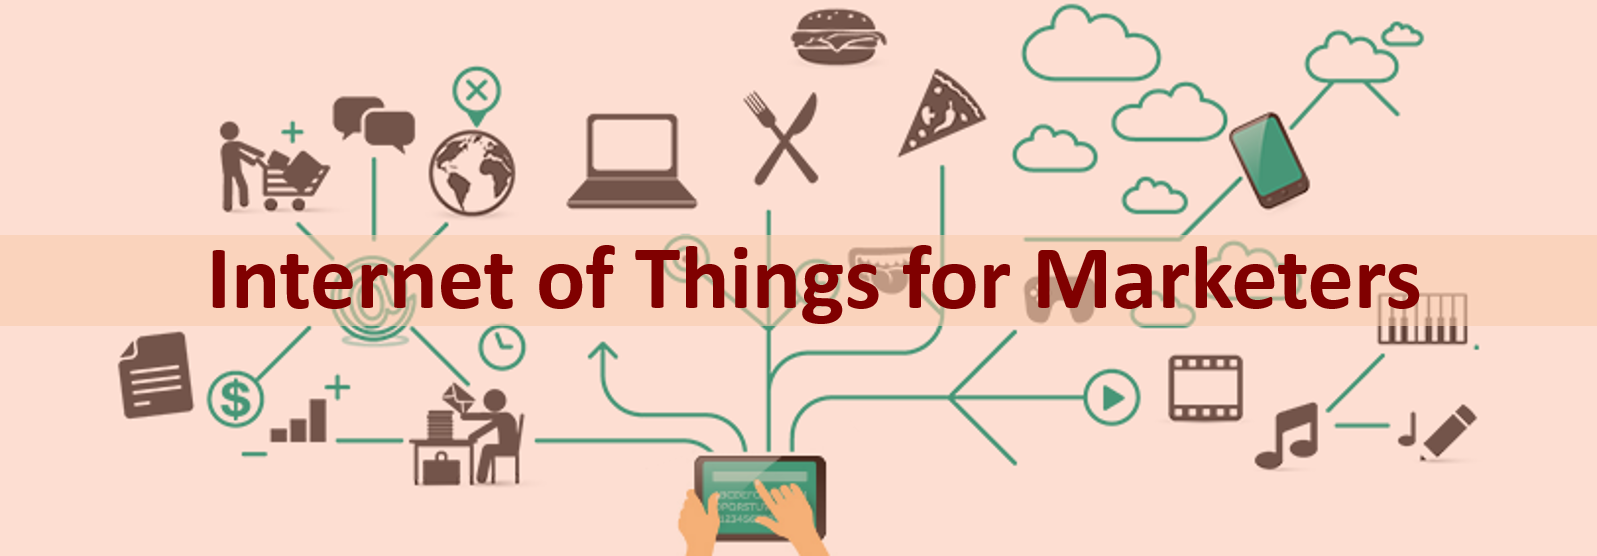 How Marketers Can Prepare for the Internet of Things (IOT)